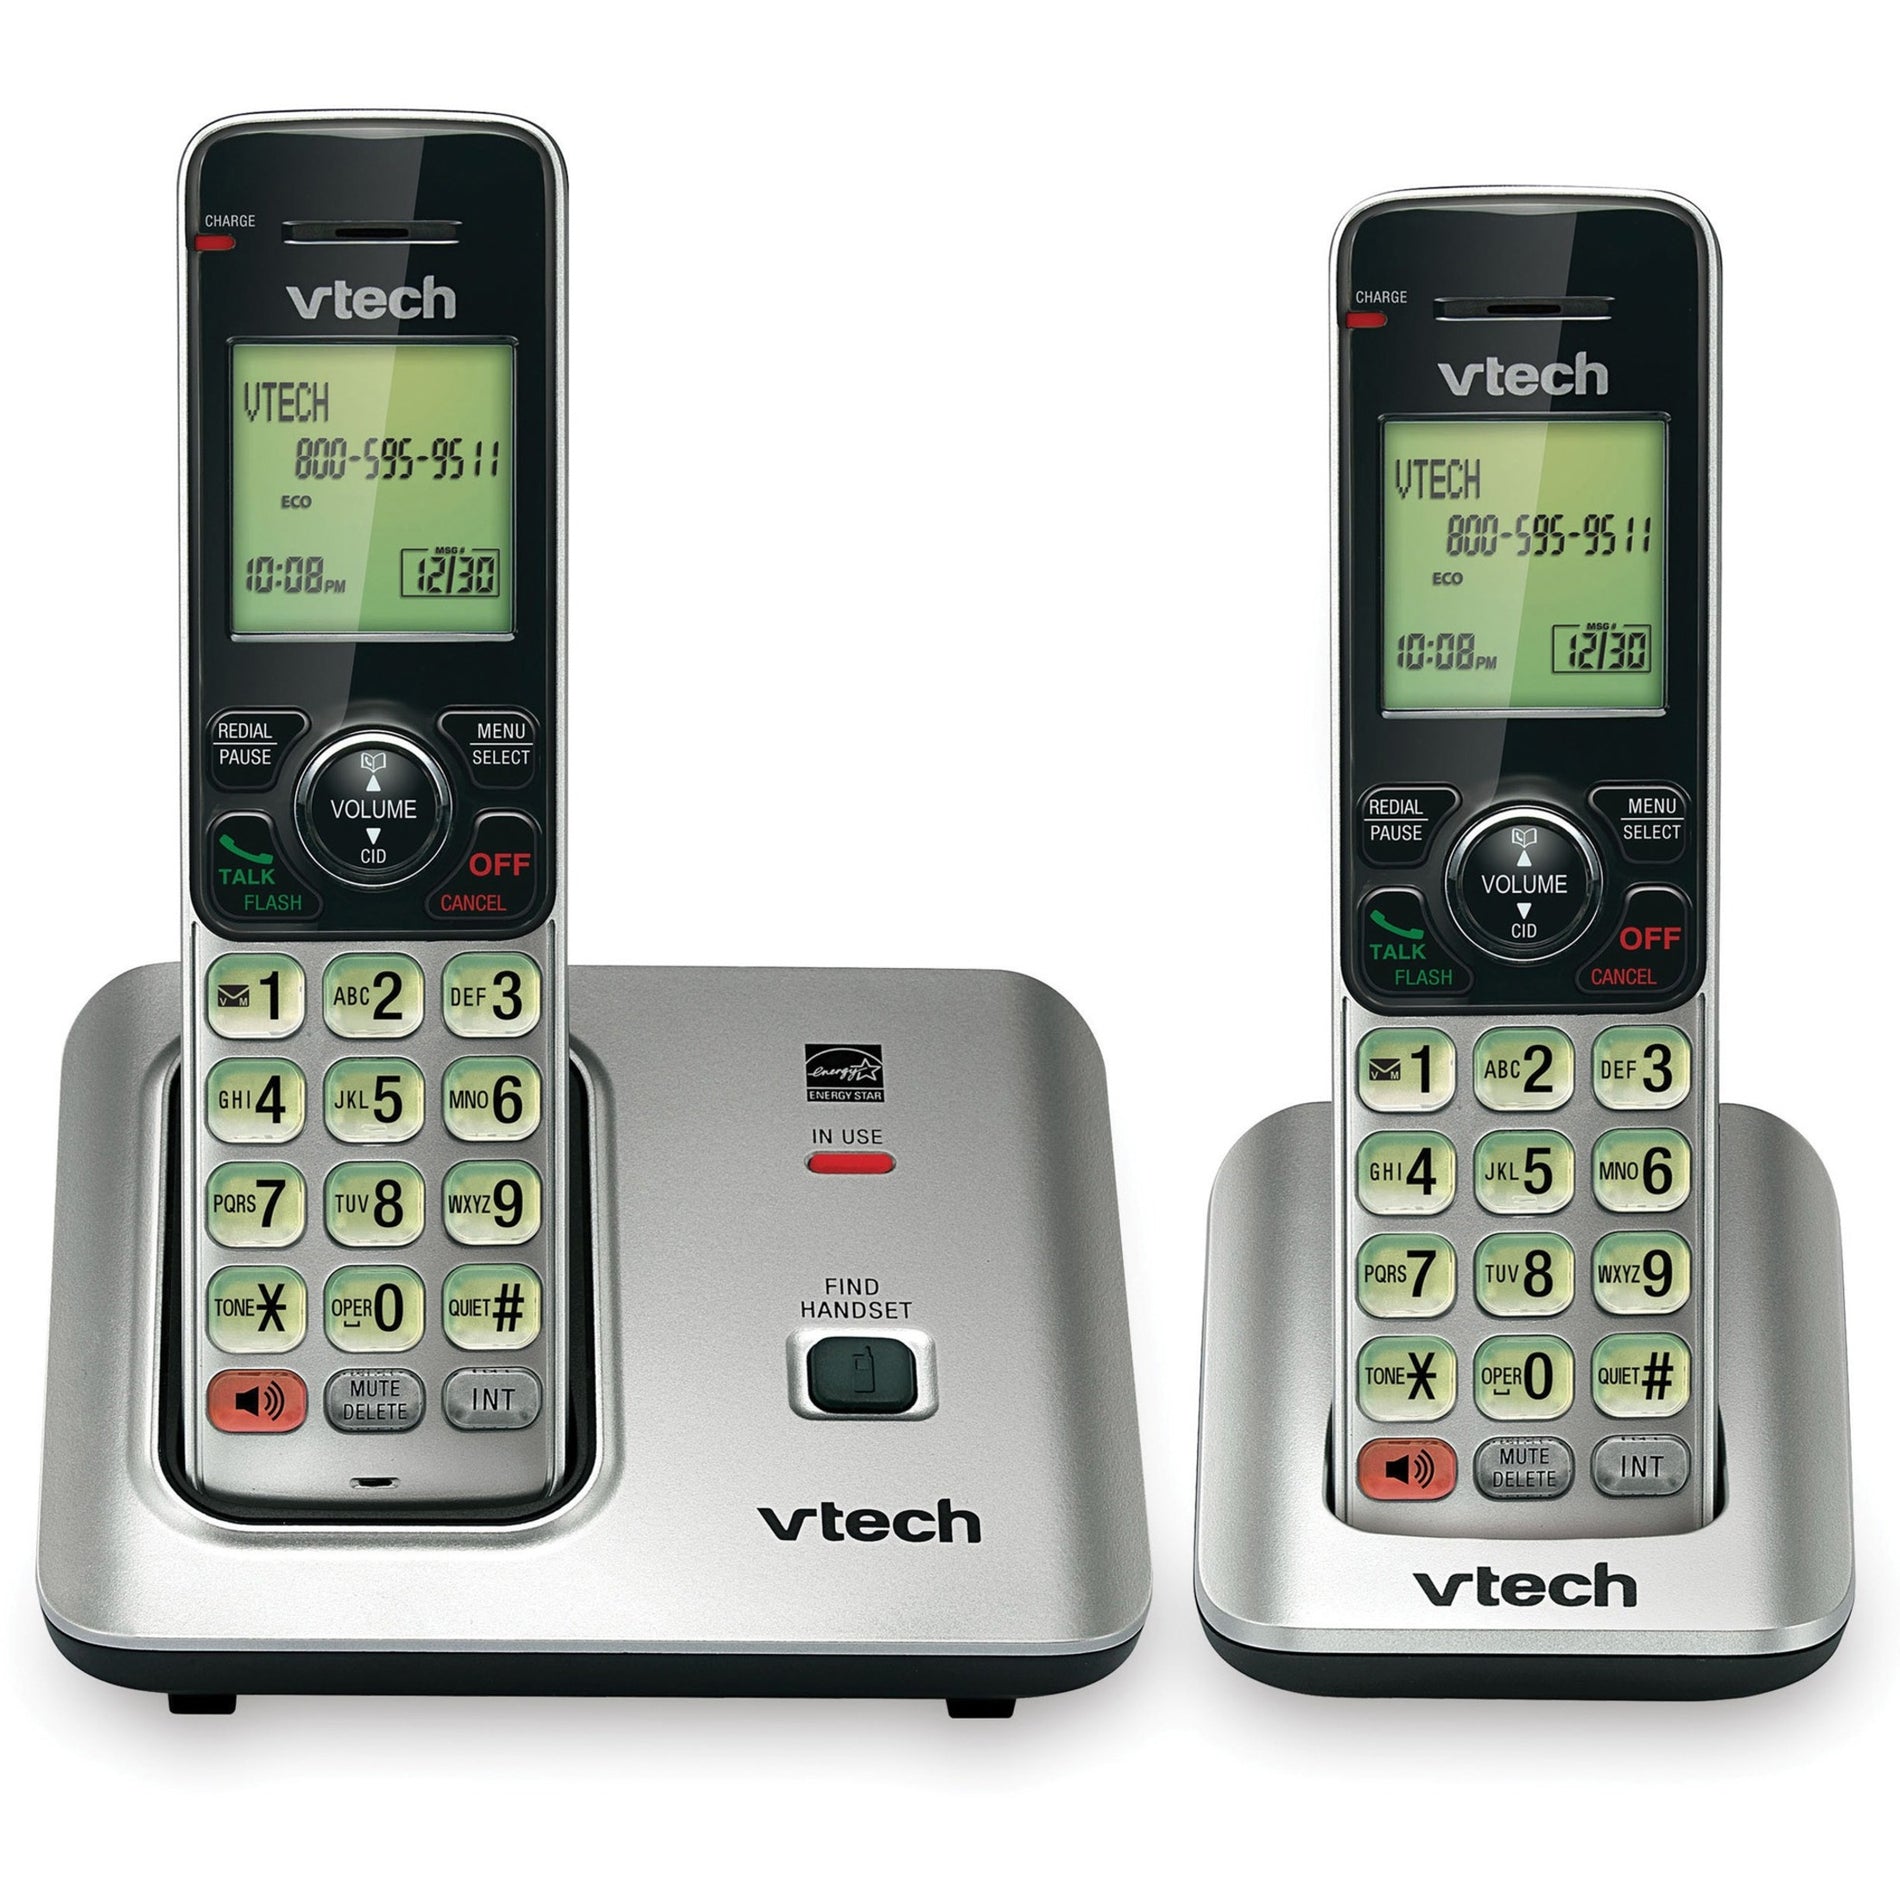 VTech 2 Handset Cordless Phone with Caller ID/Call Waiting [Discontinued]